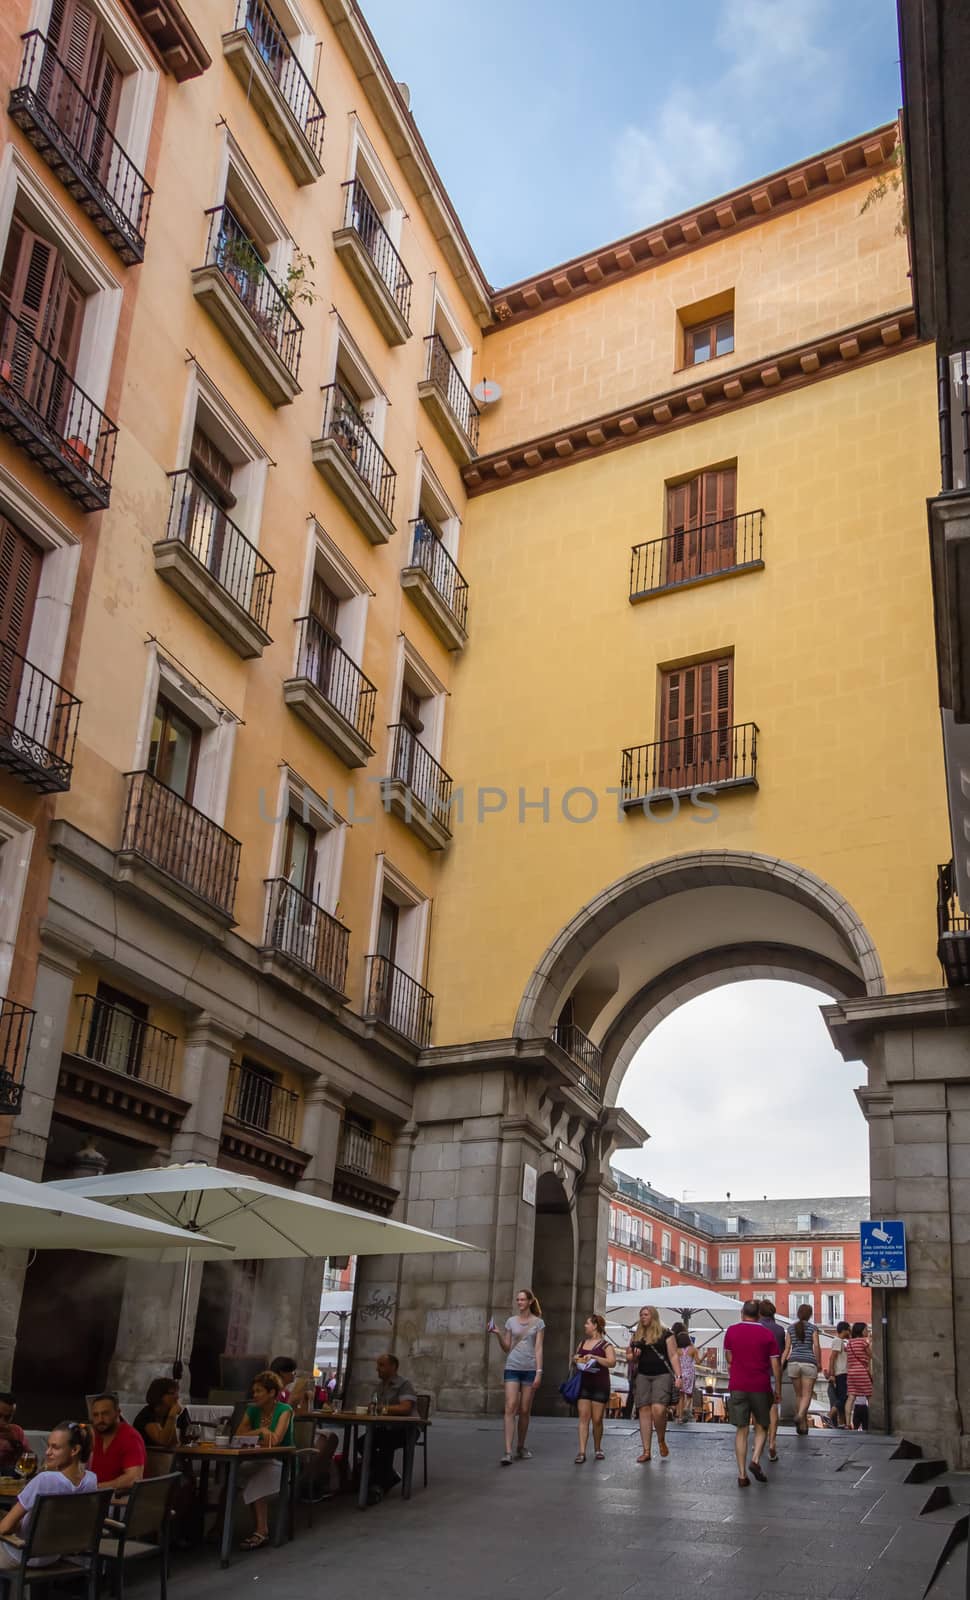 Archway entrance to Plaza Mayor of Madrid, Spain by doble.d